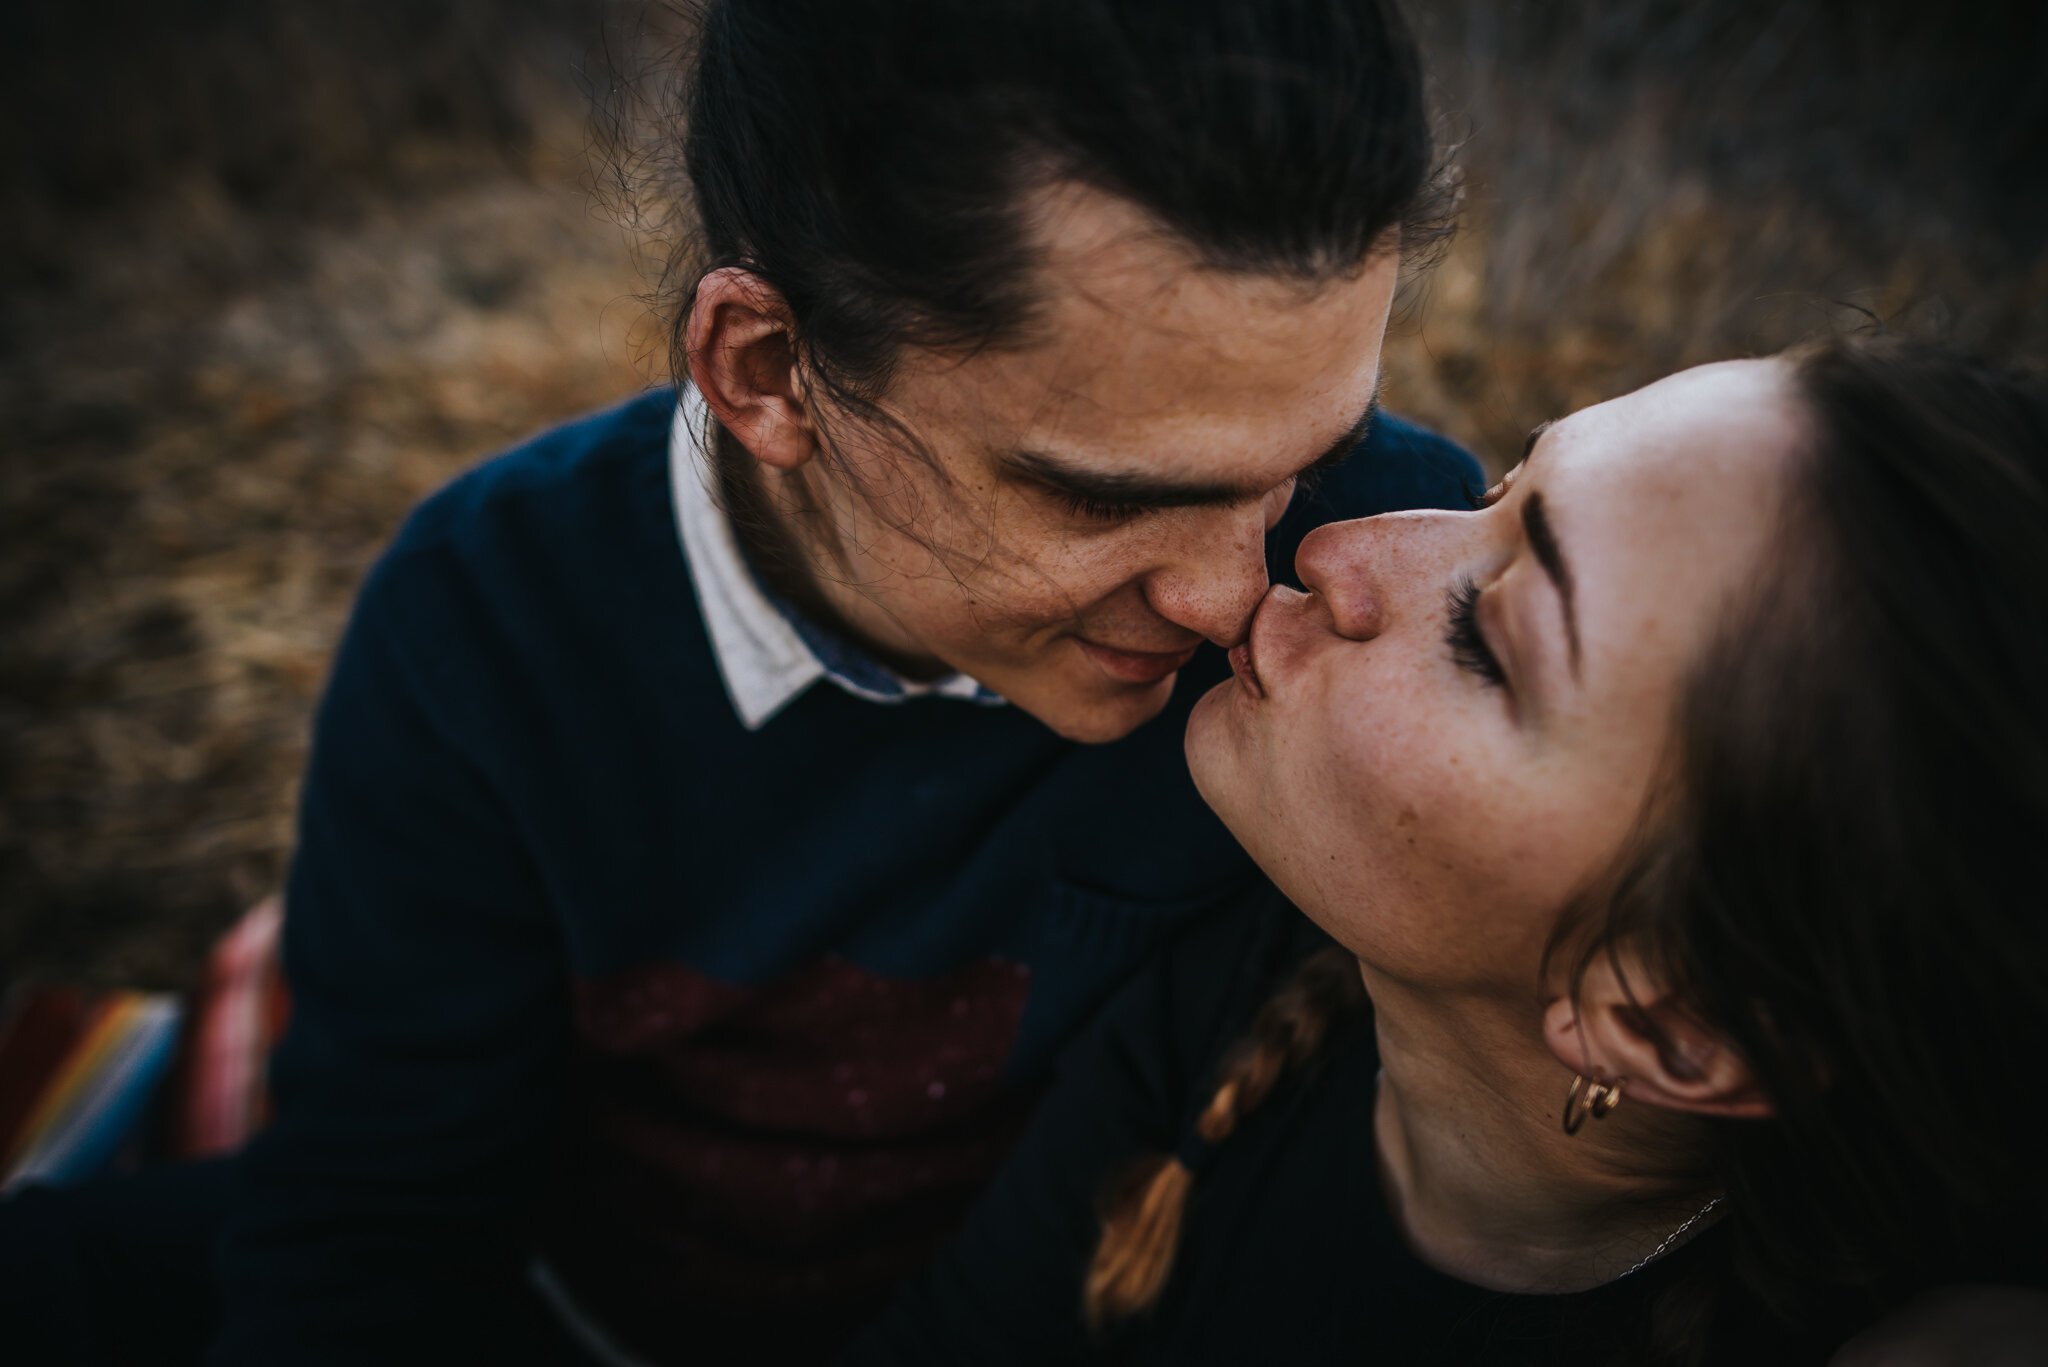 Yulia+and+Logan+Couples+Session+Colorado+Springs+Colorado+Sunset+Cheyenne+Canyon+Husband+Wife+Wild+Prairie+Photography-24-2020.jpeg